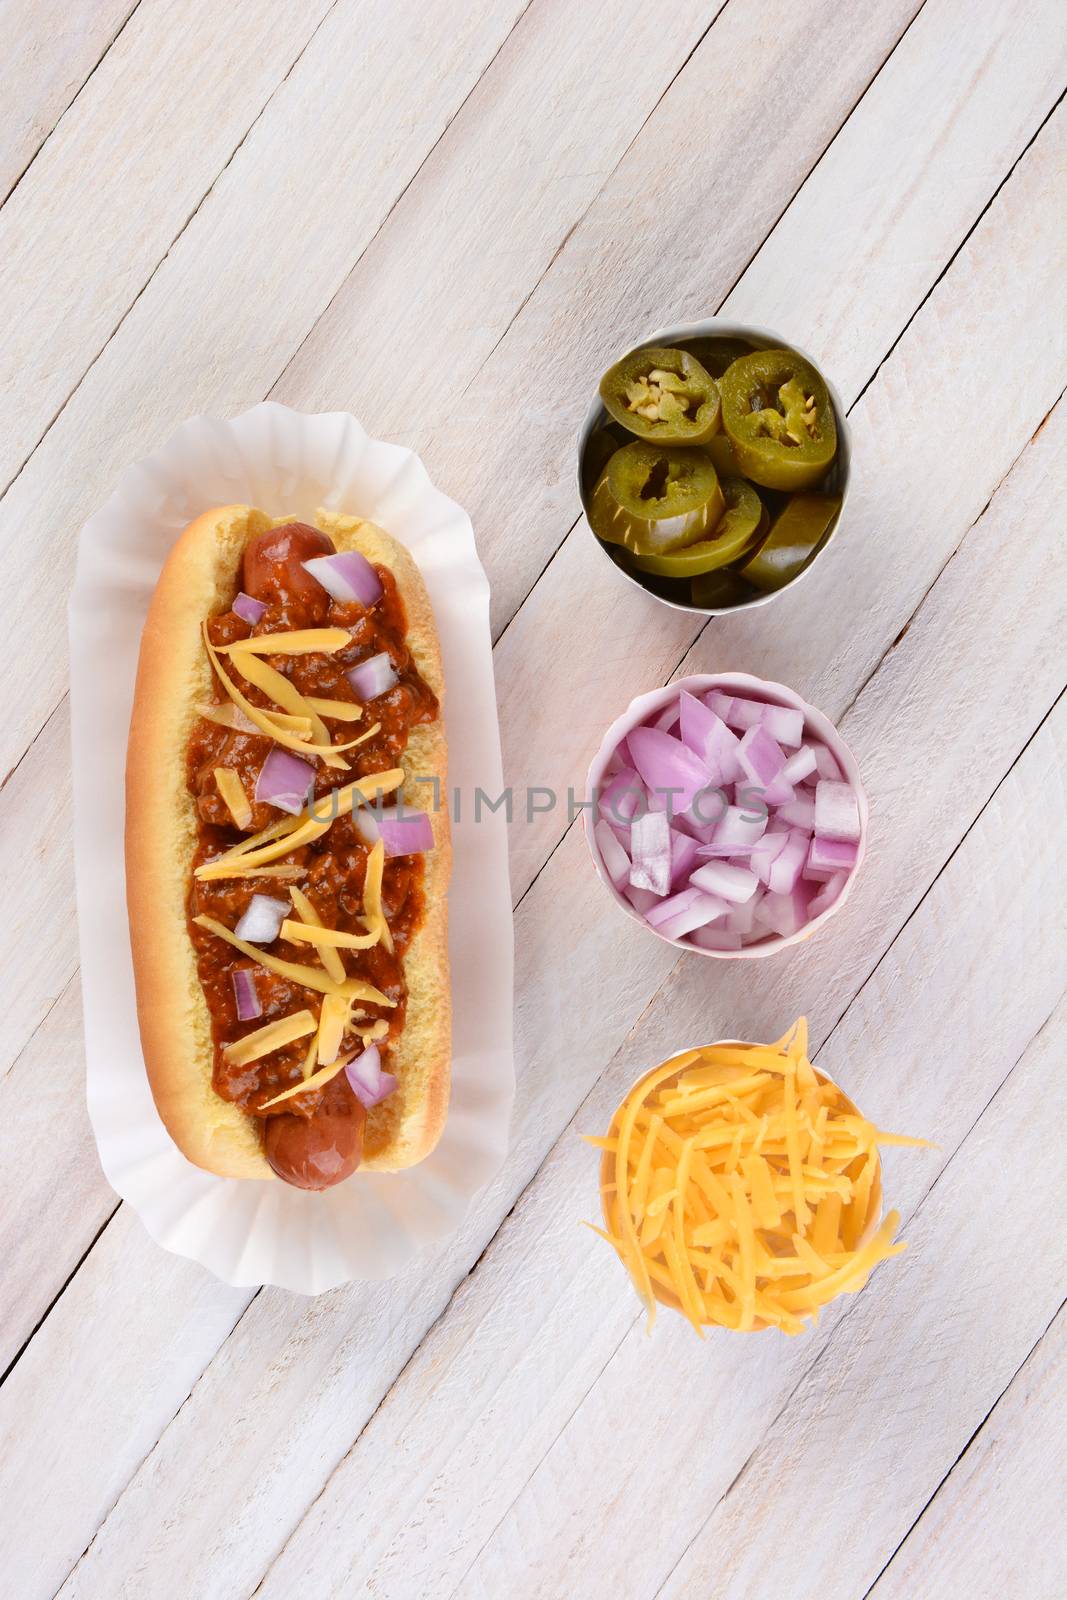 High angle shot of a Chili Hot Dog with chili, onions and shredded cheese on a rustic white wood picnic table. Cups of chopped onions, peppers and cheese are lined up by its side.